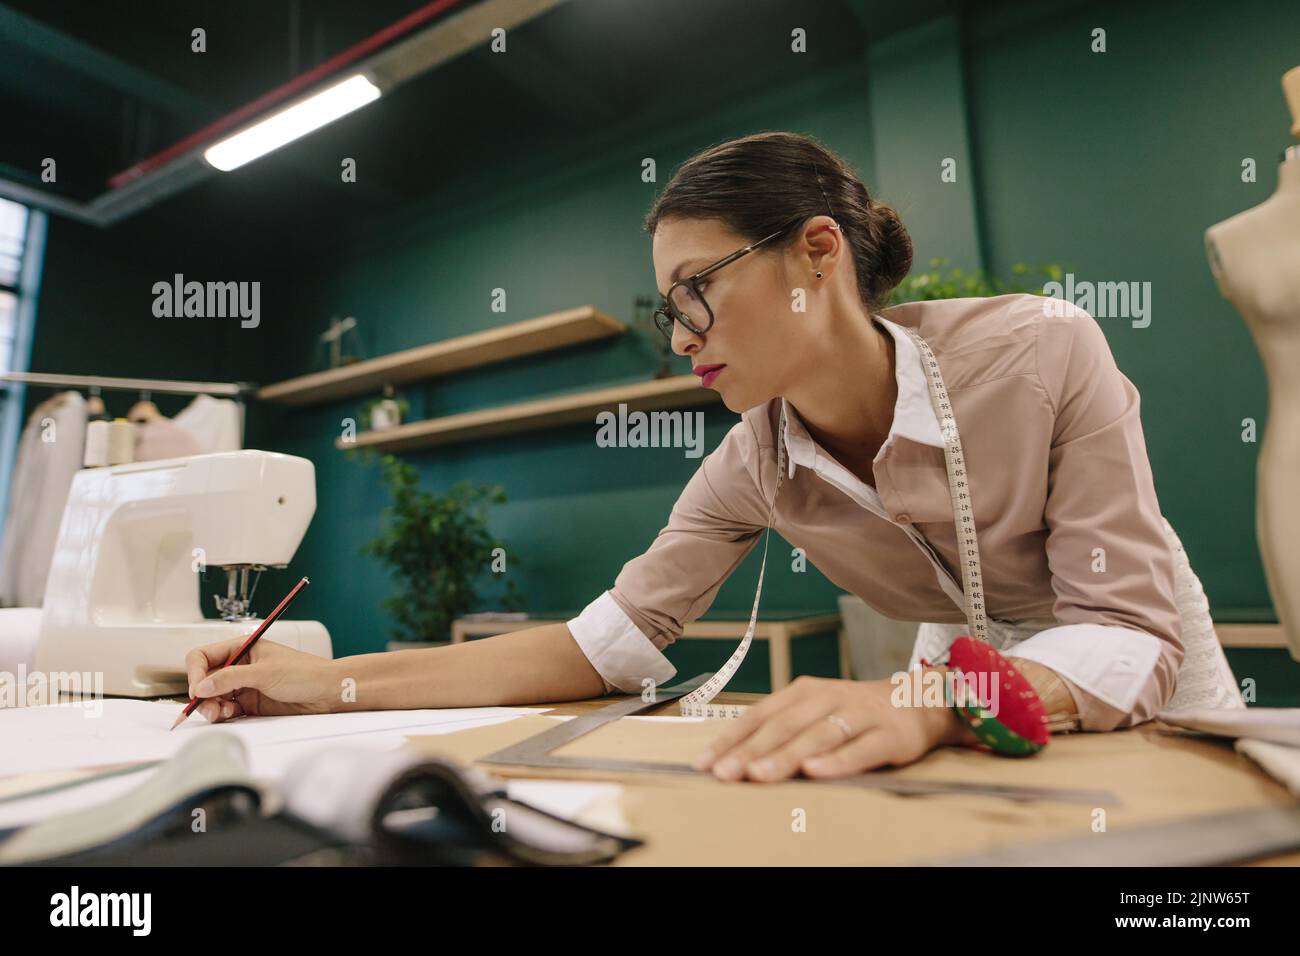 Fashion designer preparing design drafts on paper in the studio. Asian woman dressmaker working on table. Stock Photo